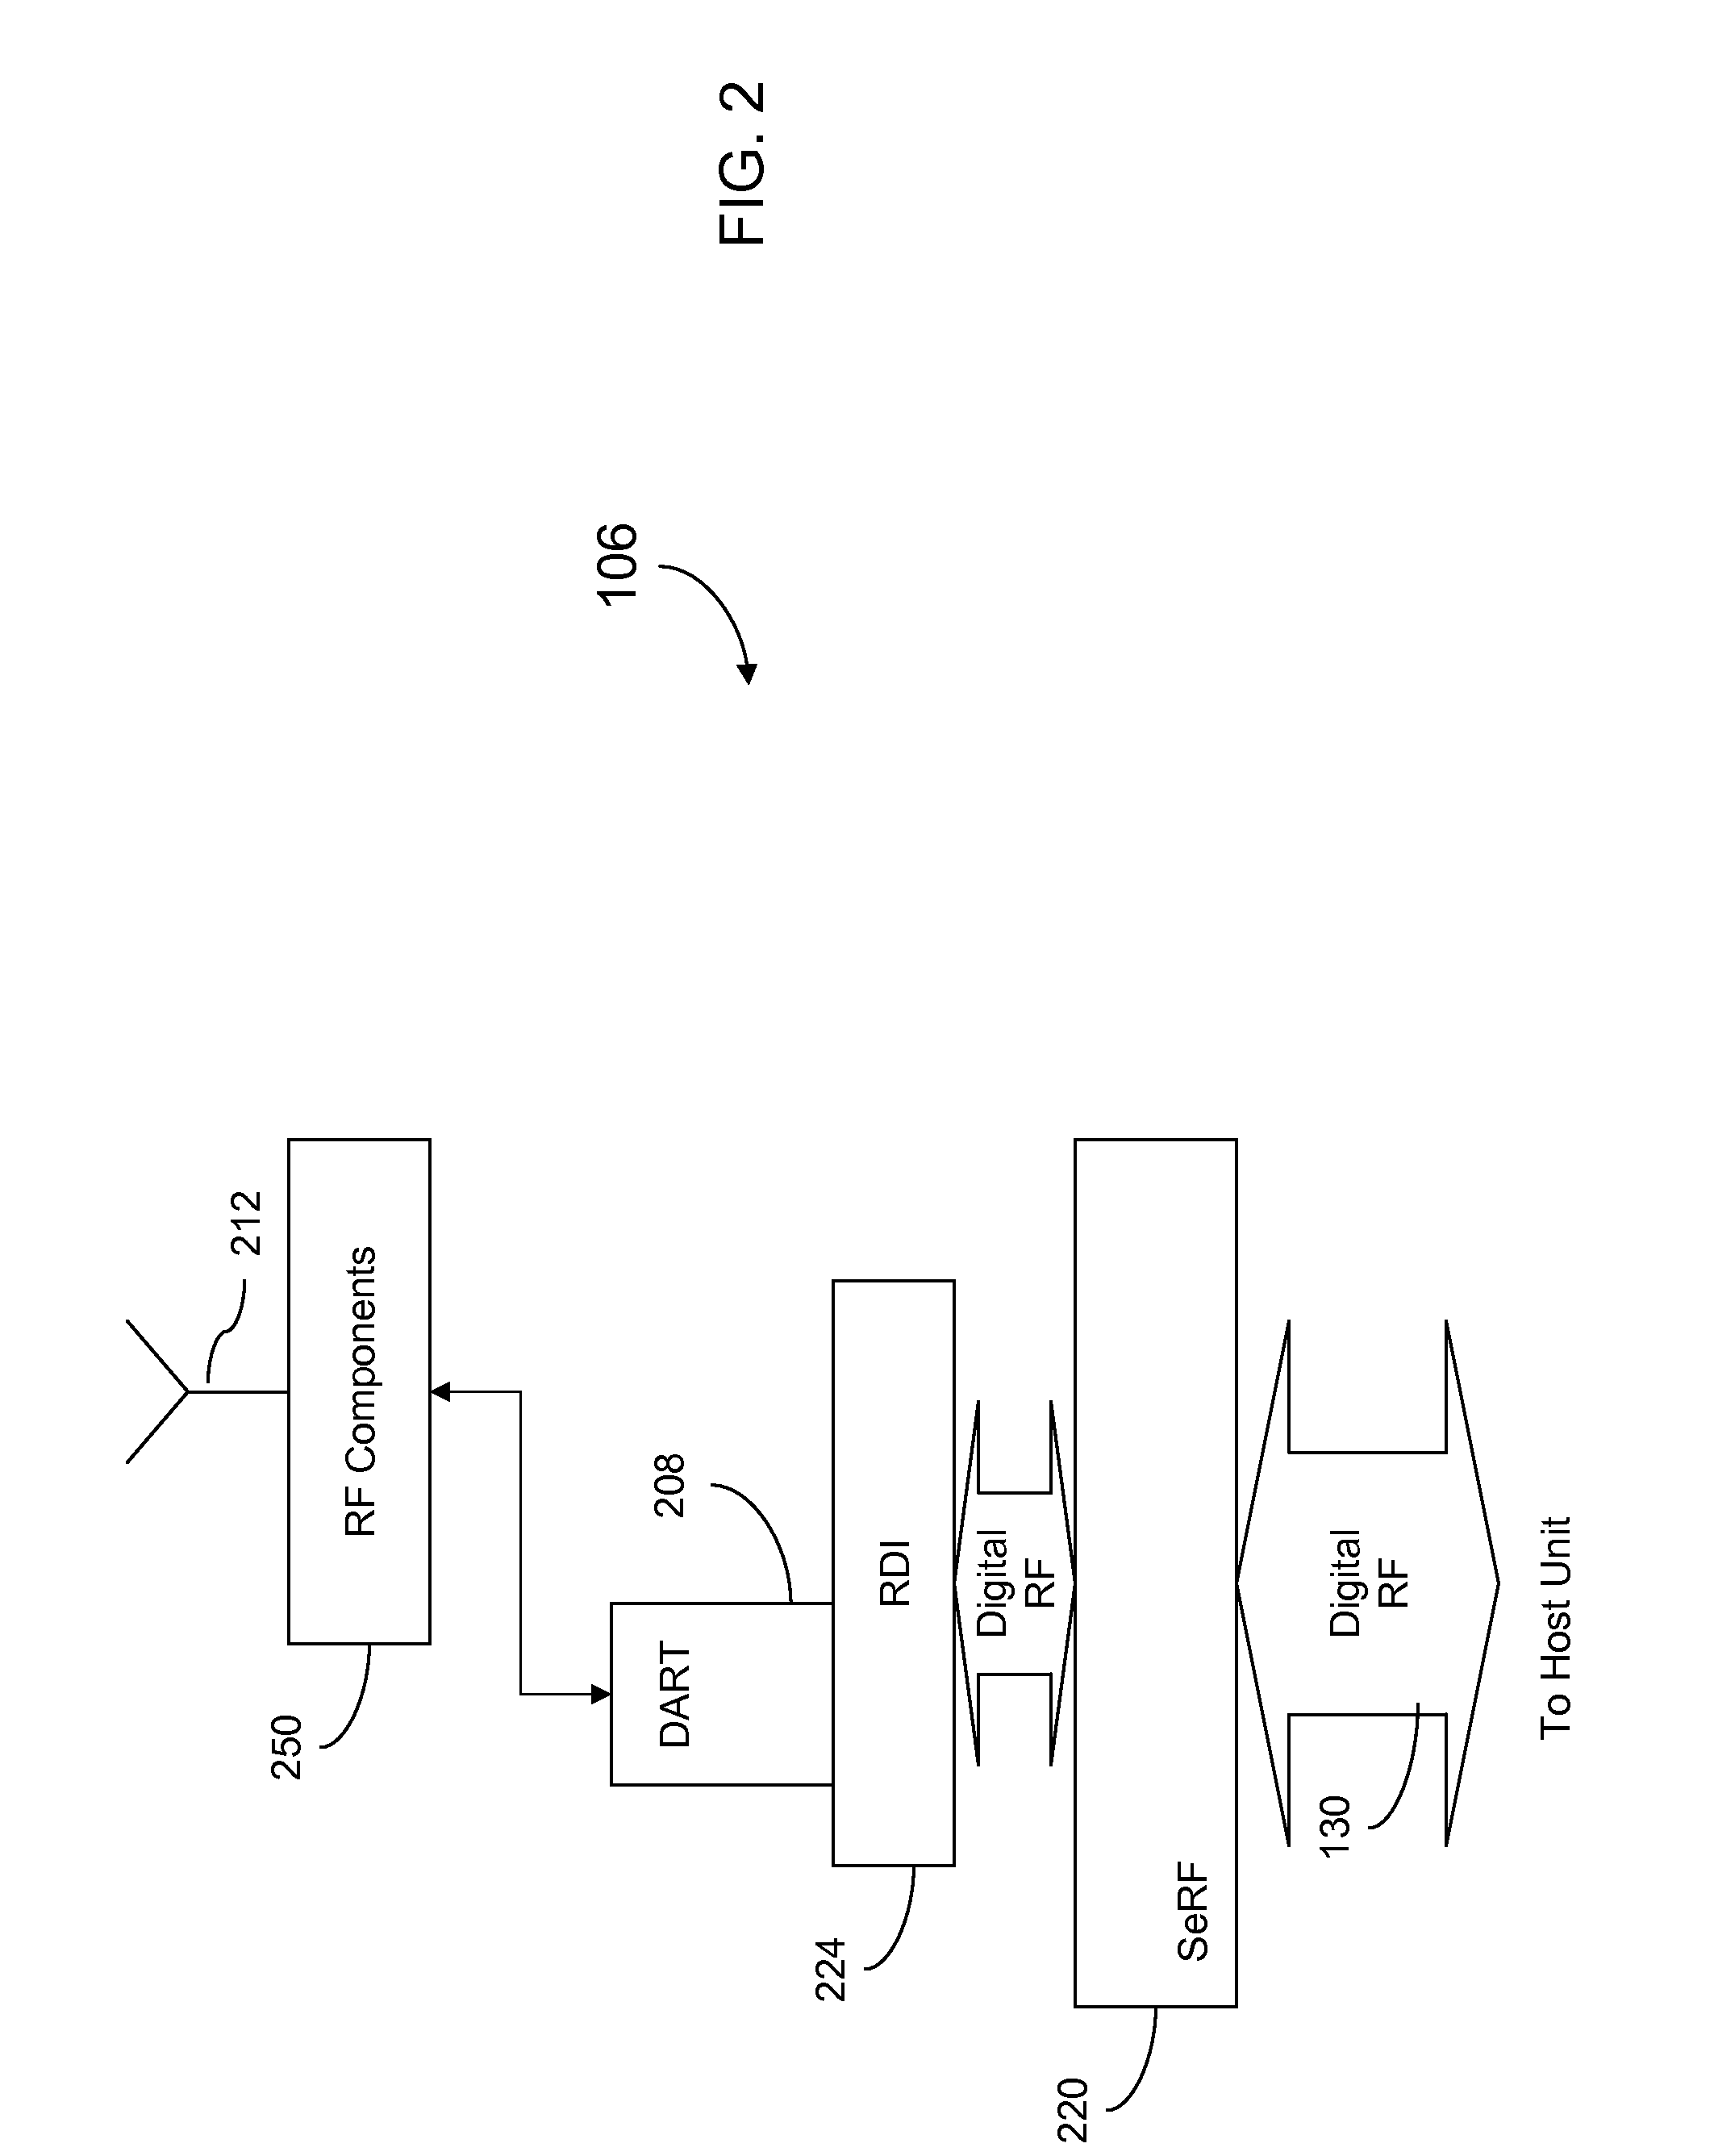 Systems and methods for improved digital RF transport in distributed antenna systems